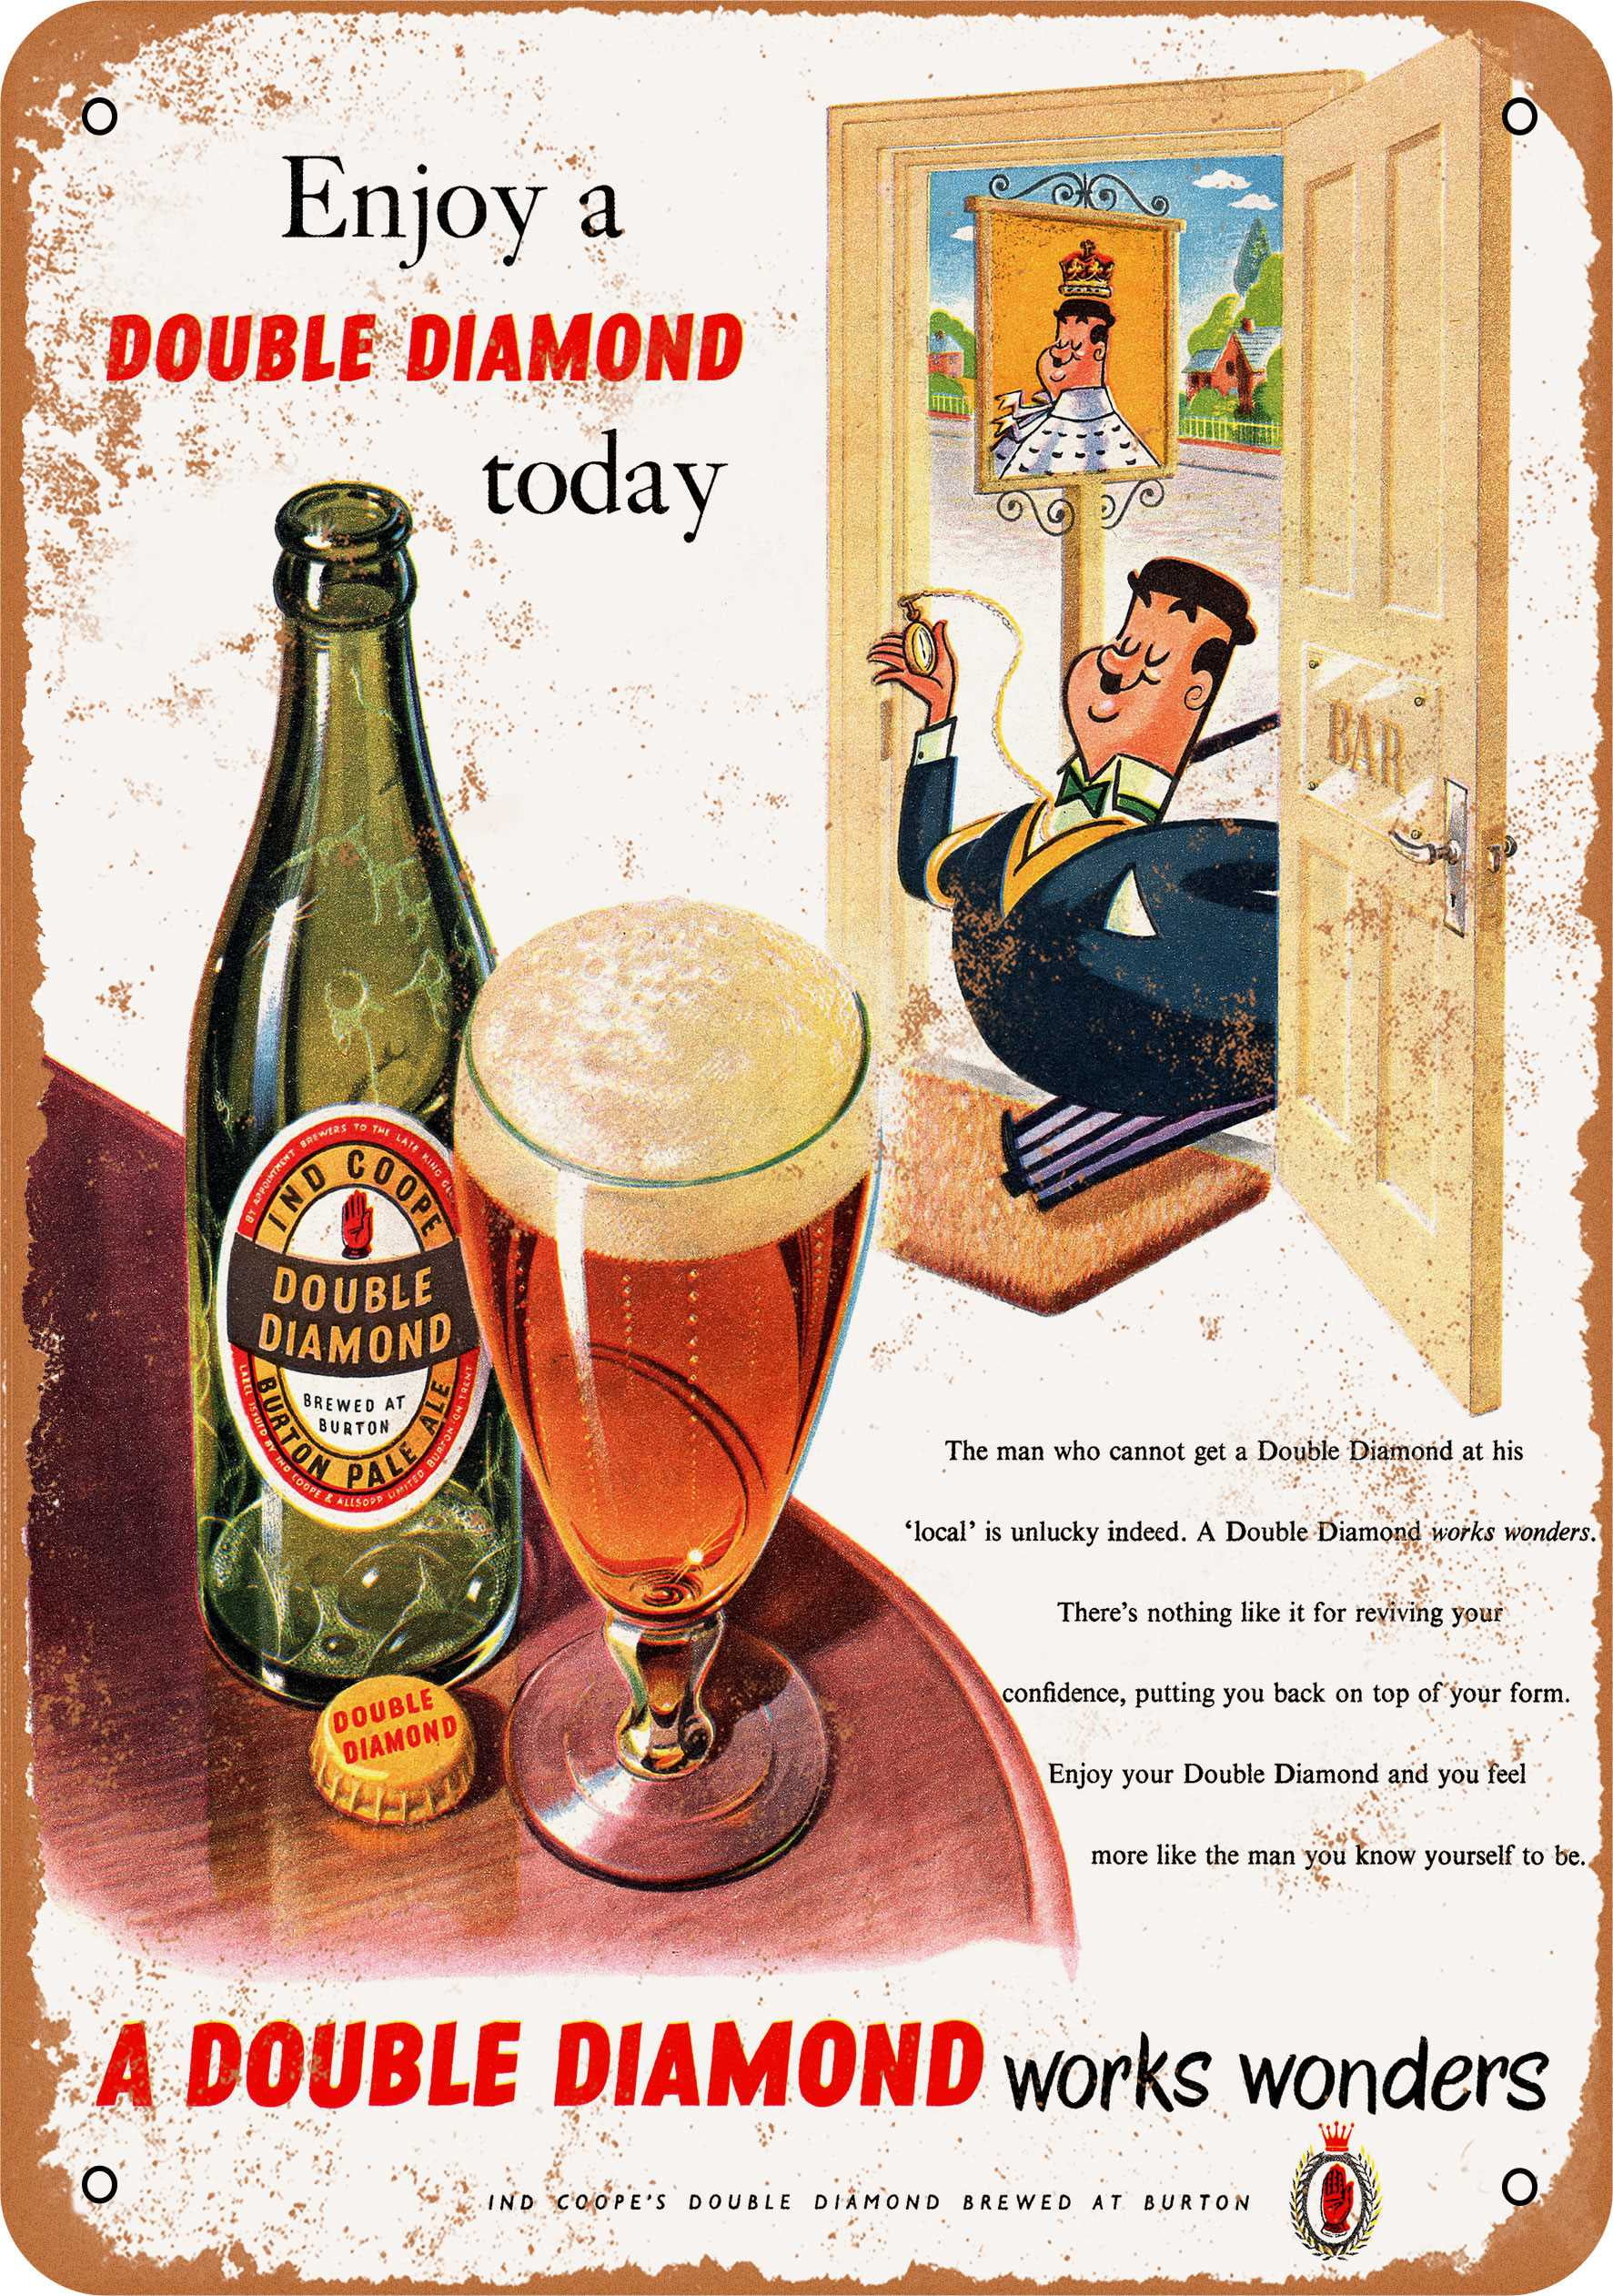 Double diamond beer 1950's Alcohol Advertising  poster reproduction.